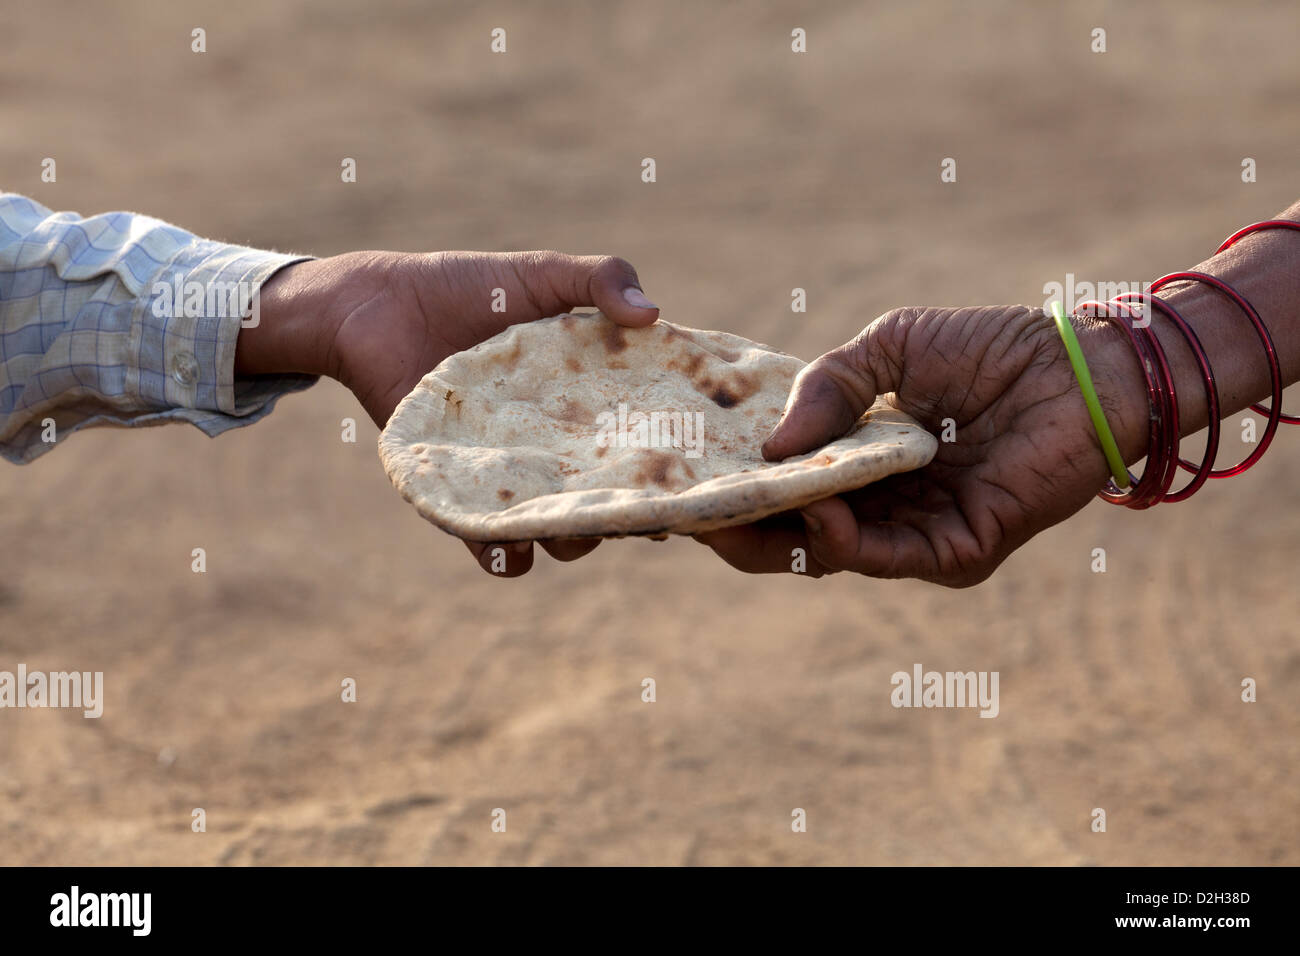 India, Uttar Pradesh, Agra, young boy's hand being given Roti (Chapati) by mother's hand Stock Photo